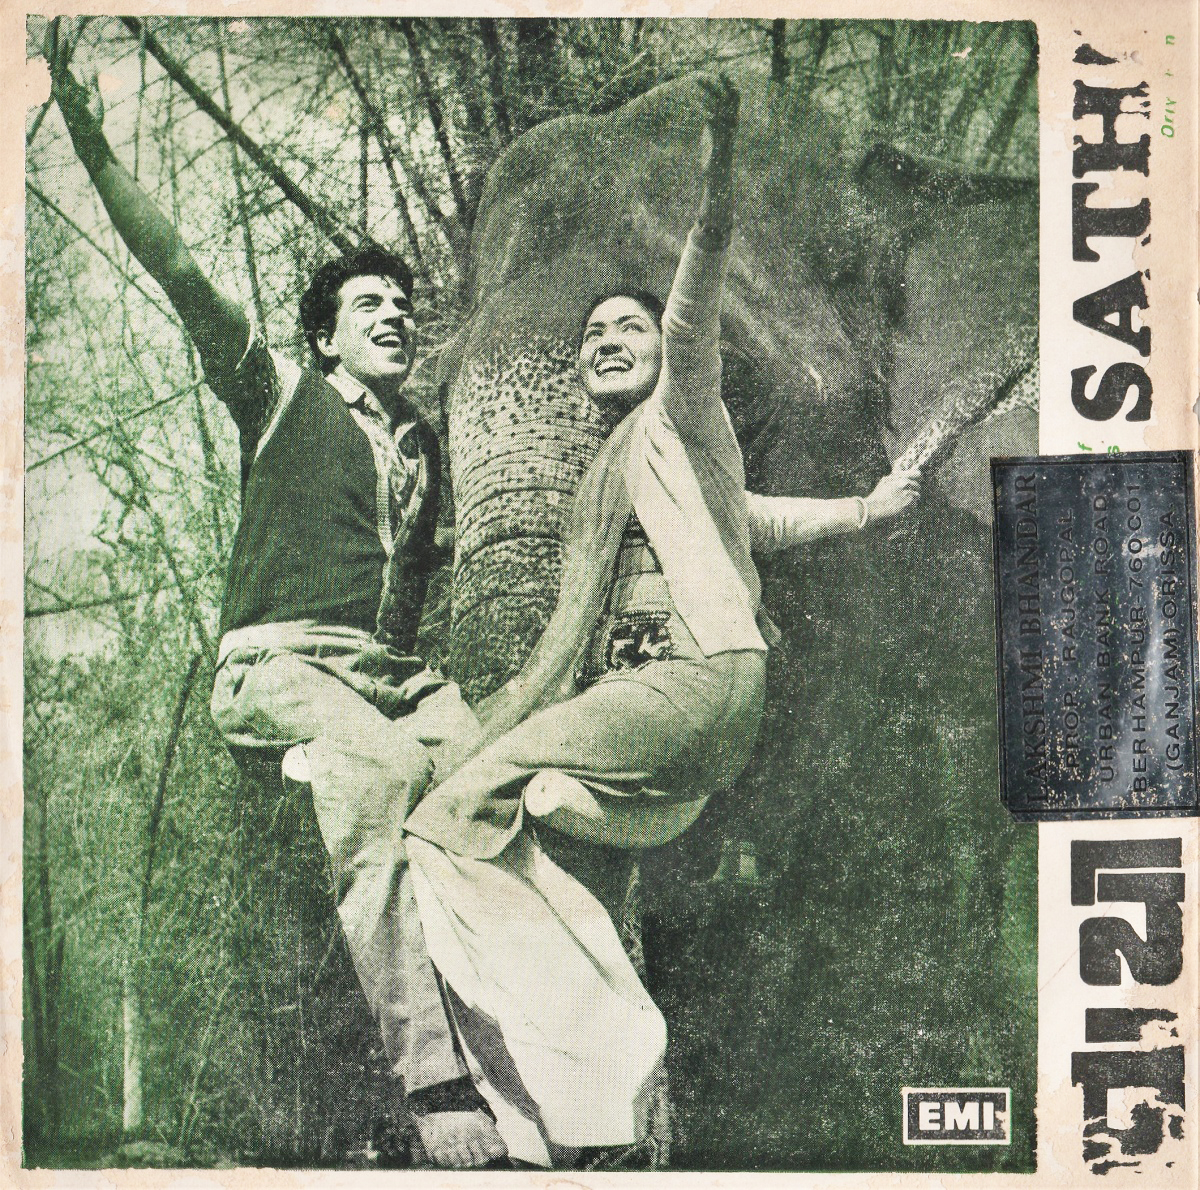 'Sathi' LP disc cover